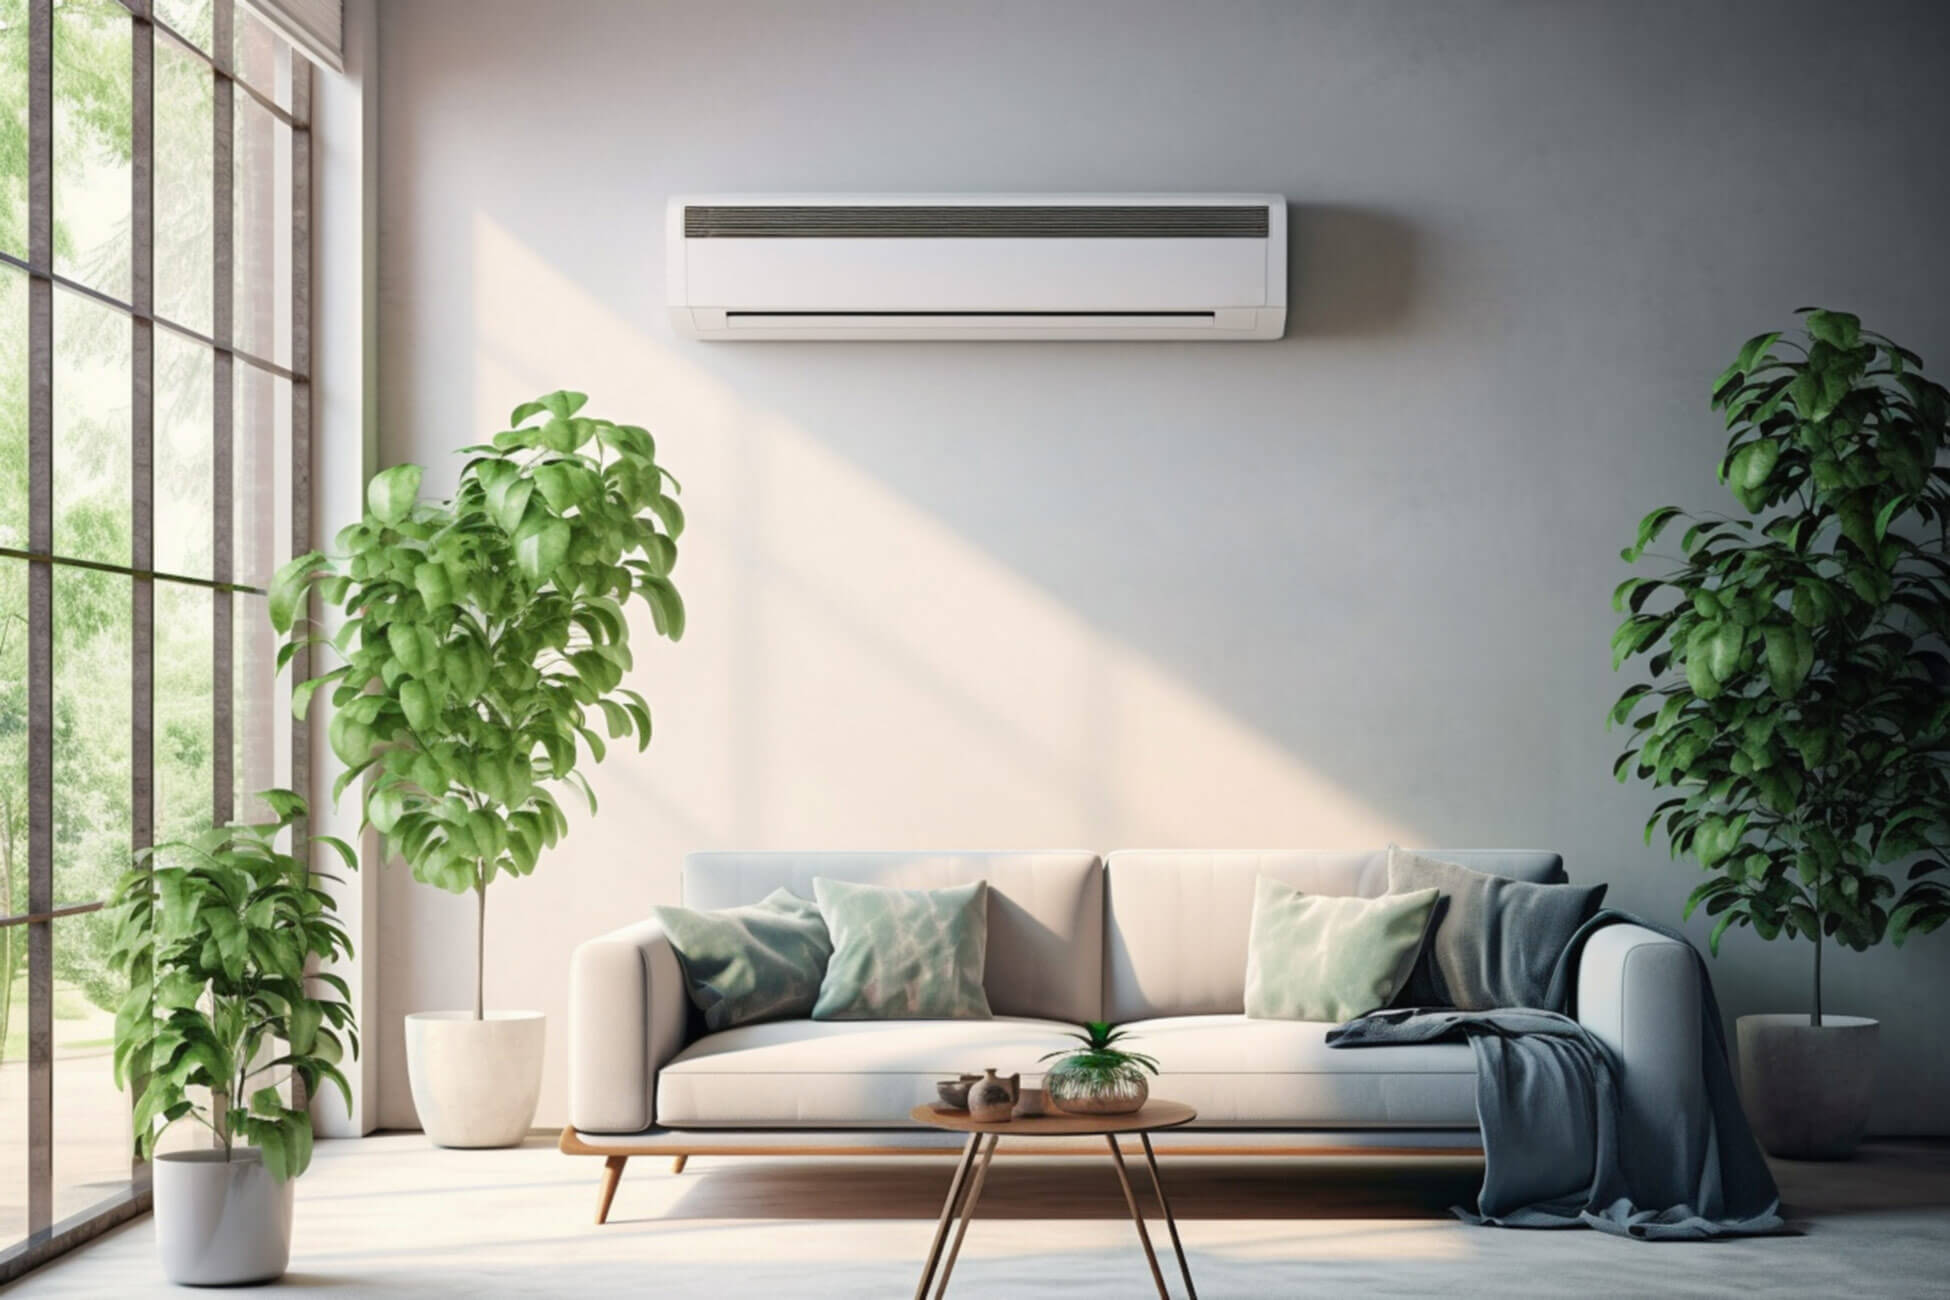 Air-conditioning-on-the-wall-in-the-living-room-with-large-windows-and-indoor-plants-and-a-sofa